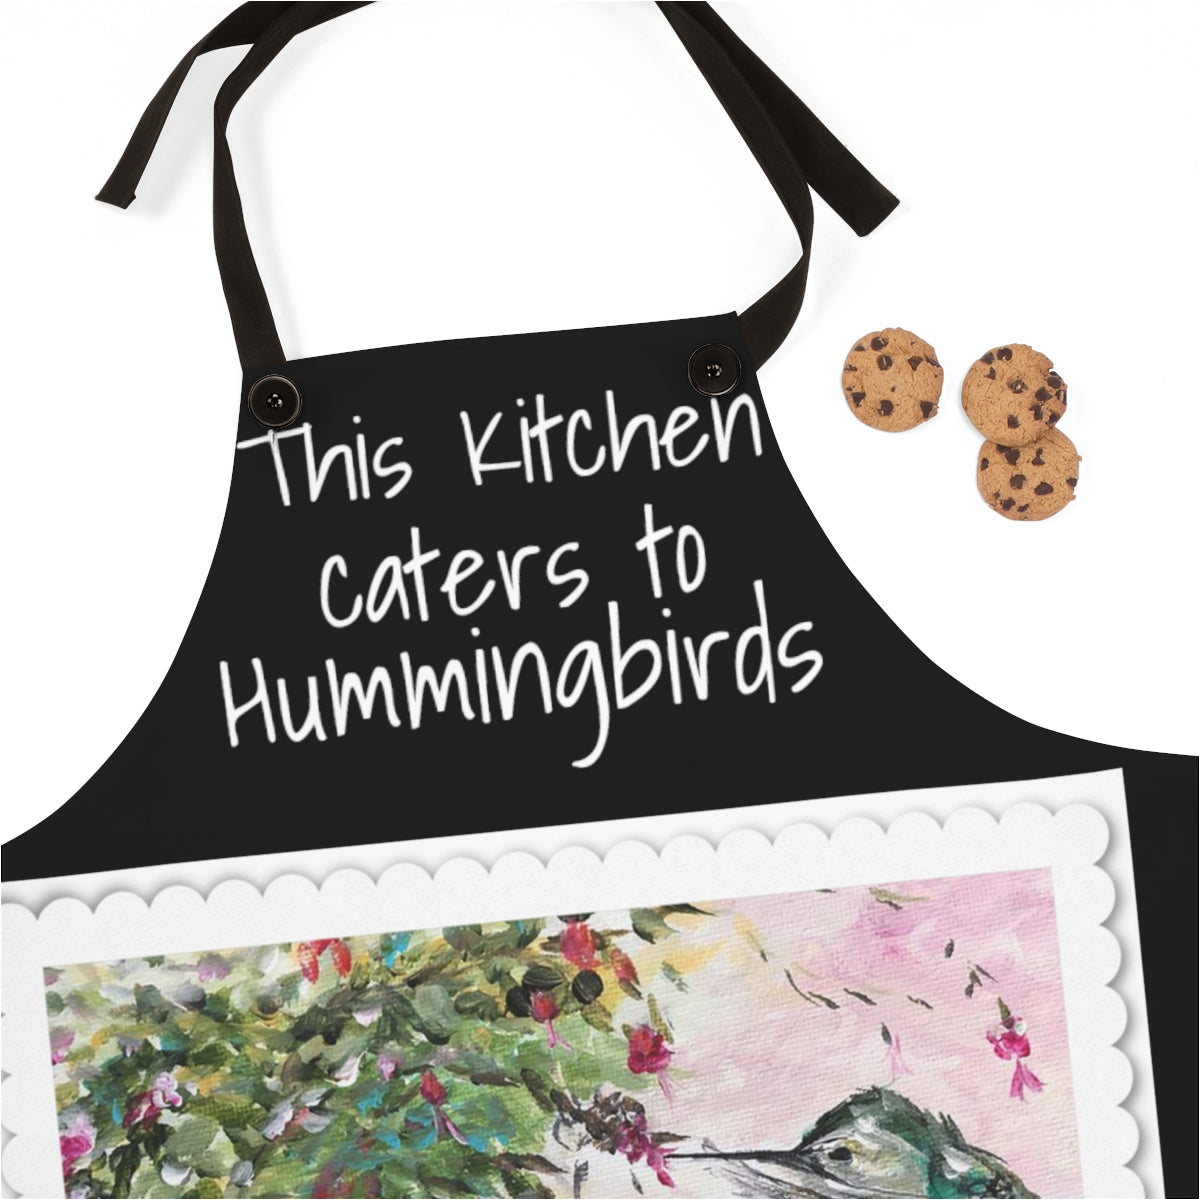 This kitchen caters to hummingbirds Apron